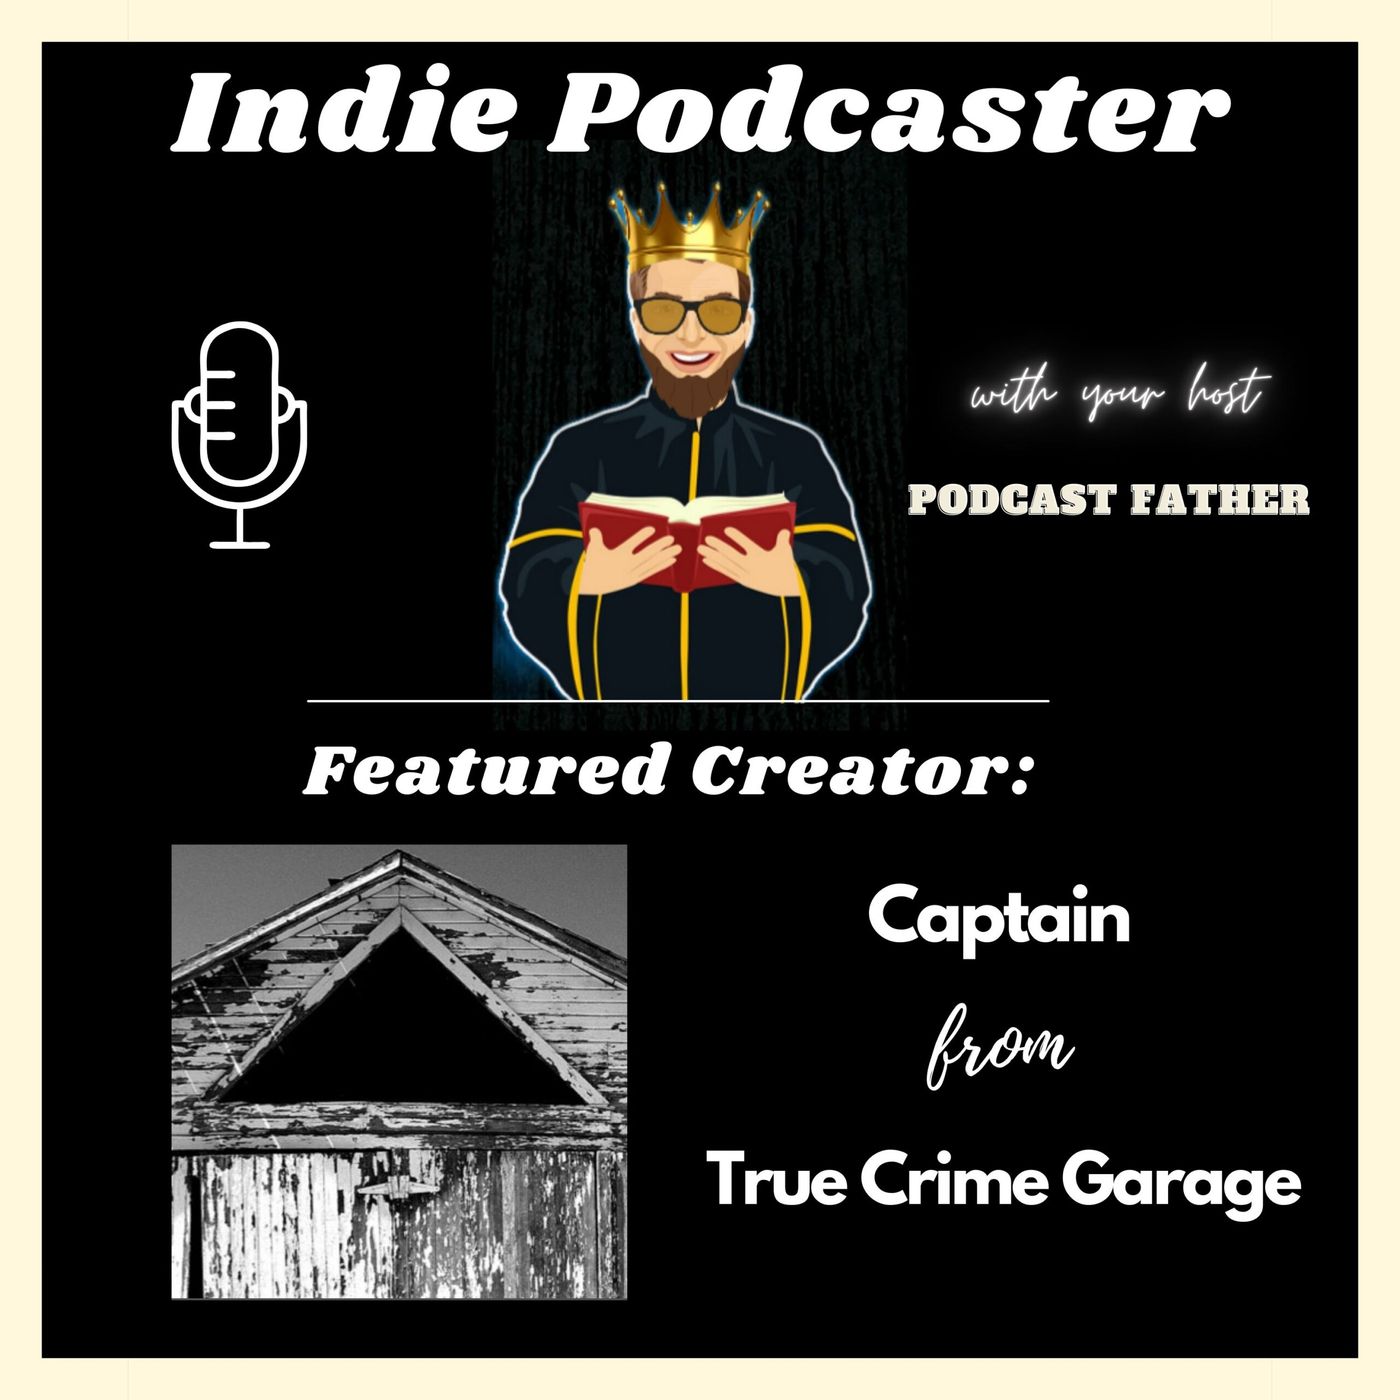 Captain from True Crime Garage by Indie Podcaster